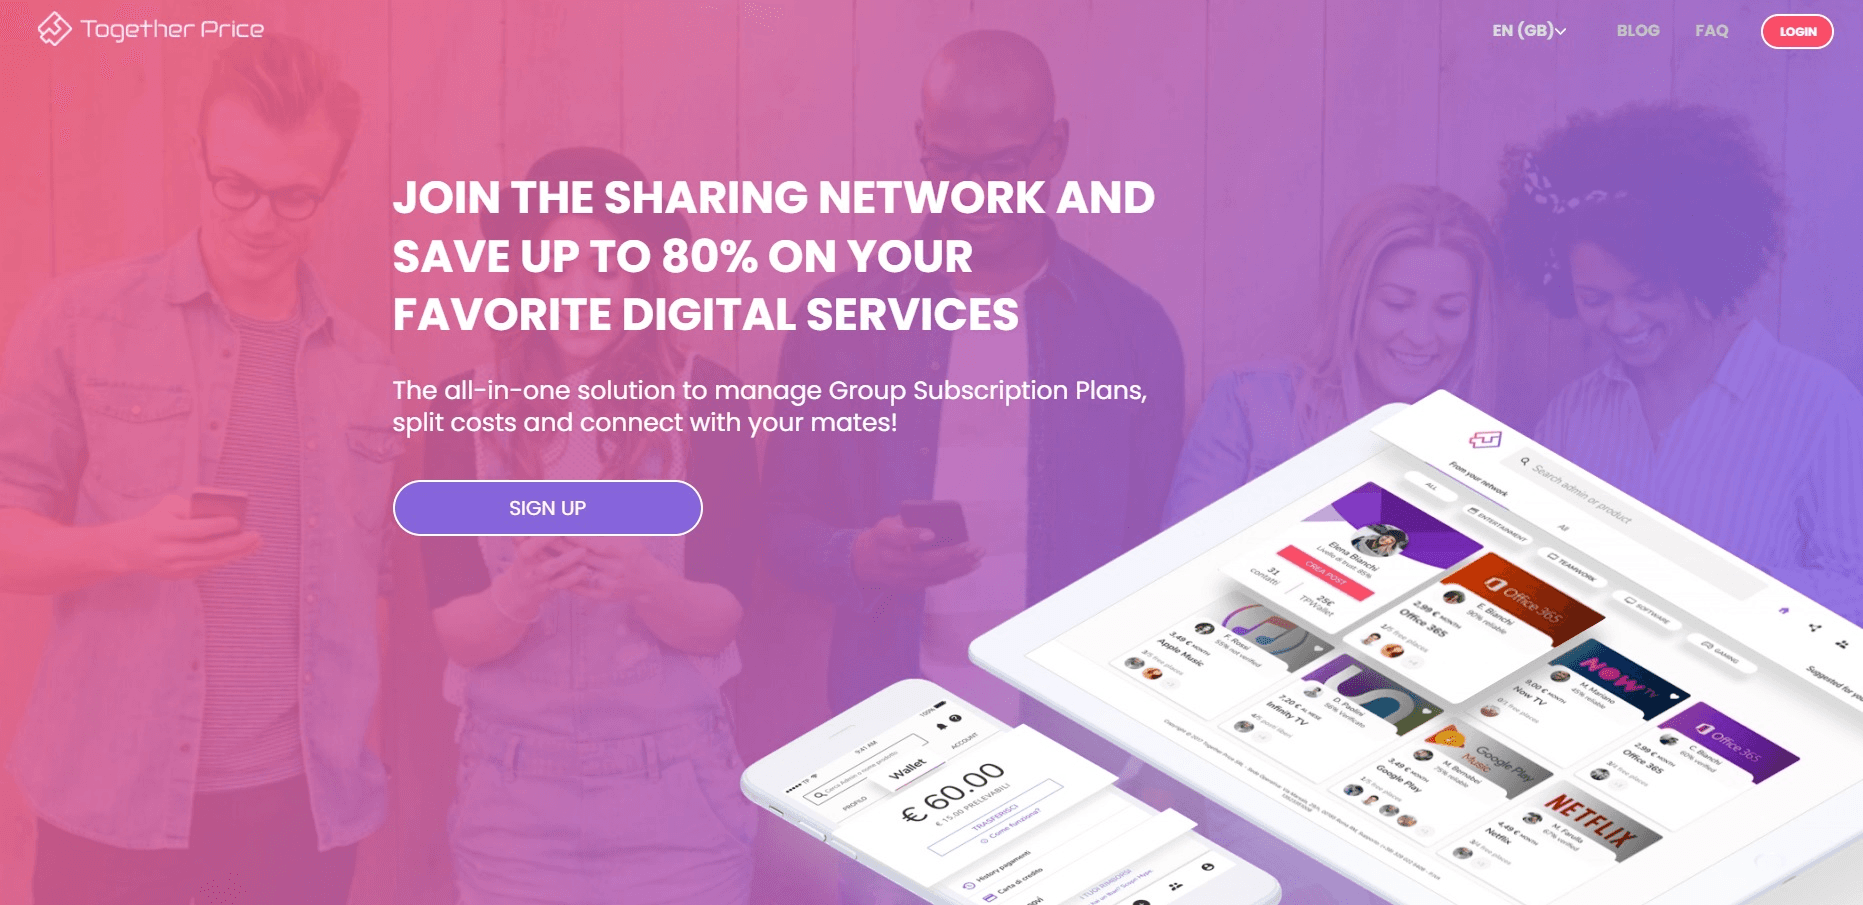 Subscription sharing groups